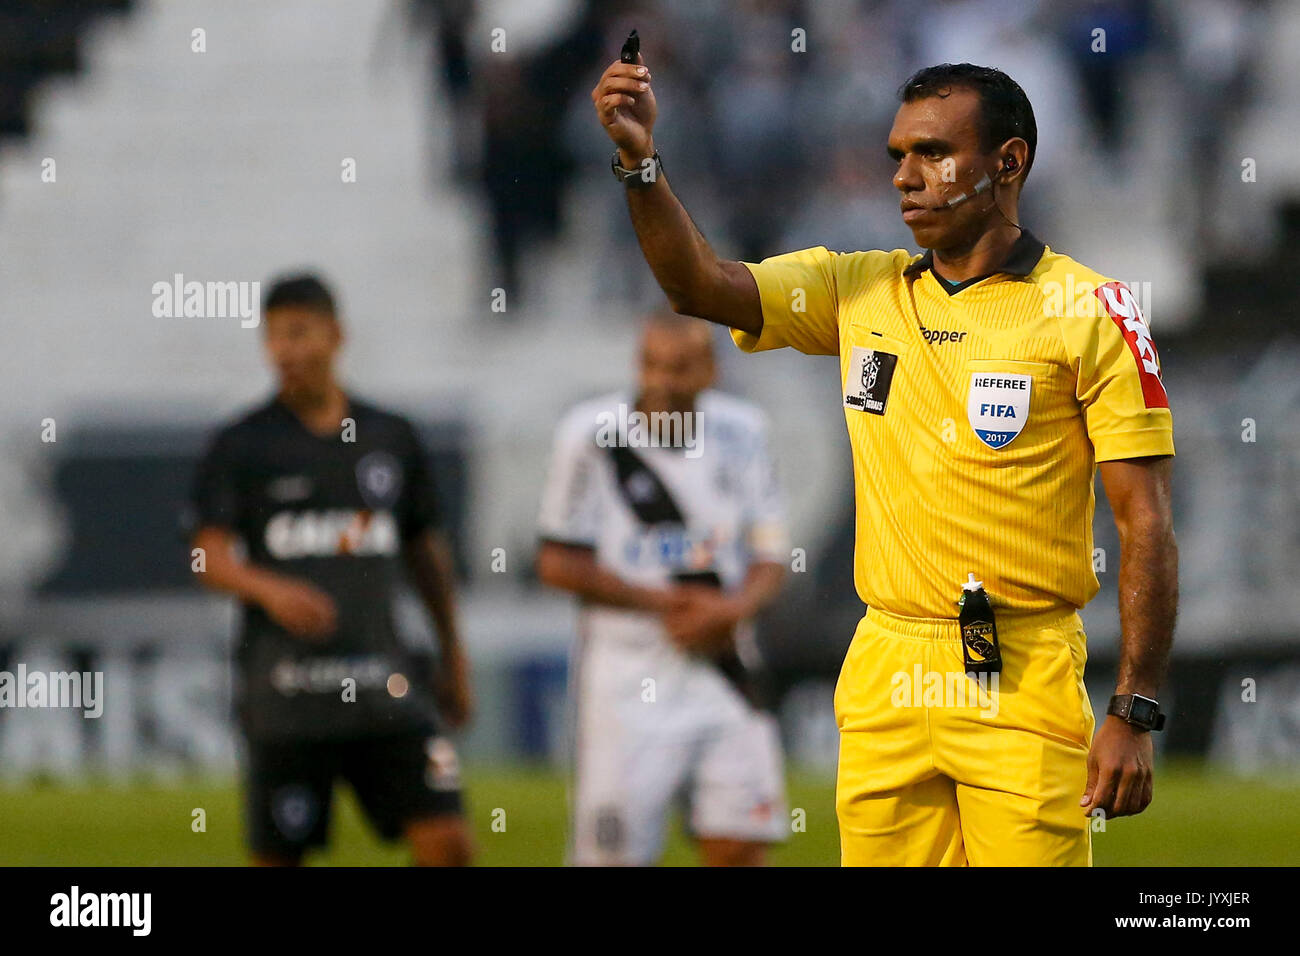 Campinas, Brazil. 20th Aug, 2017. Referee during the match between Ponte Preta and Botafogo, valid for the 21st round of the Brazilian Championship 2017, held at the Moises Lucarelli Stadium in Campinas (SP). Credit: Marco Galvão/FotoArena/Alamy Live News Stock Photo